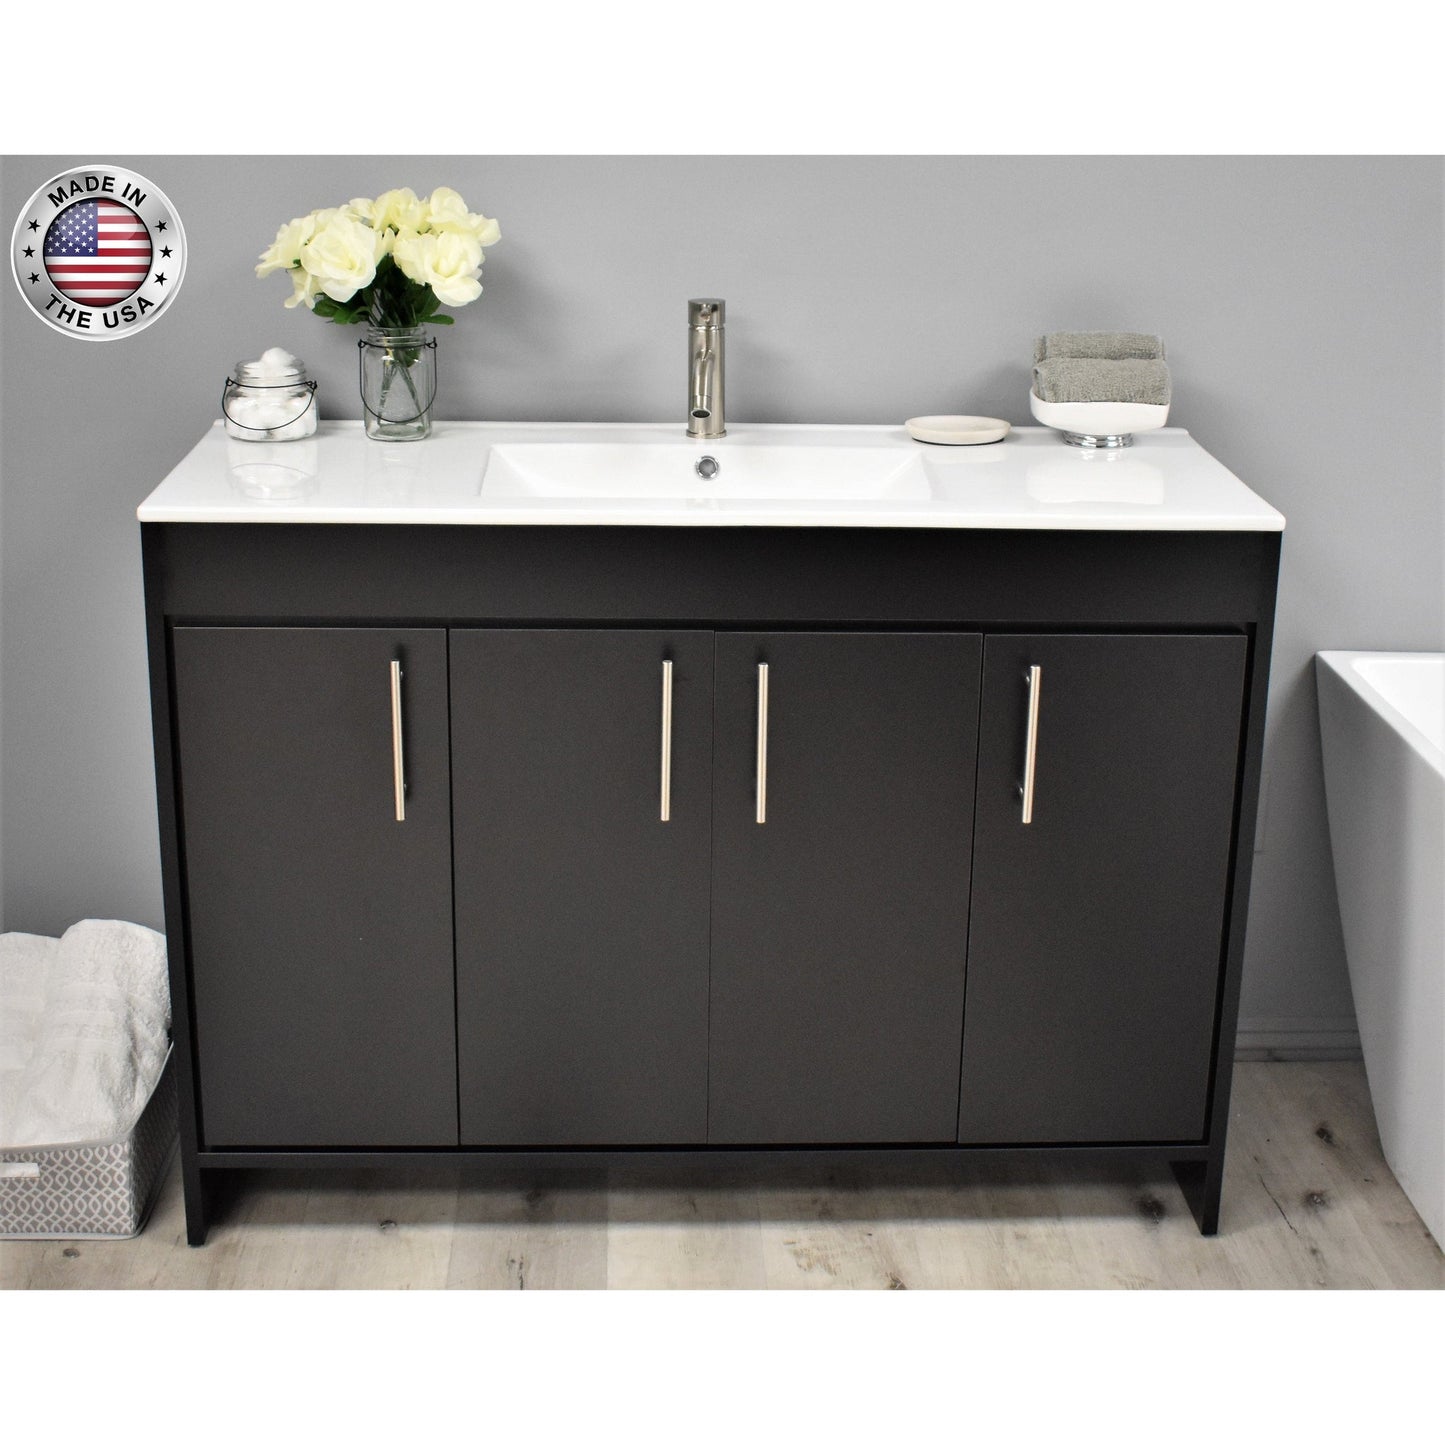 Volpa USA Villa 48" Black Freestanding Modern Bathroom Vanity With Integrated Ceramic Top and Brushed Nickel Round Handles